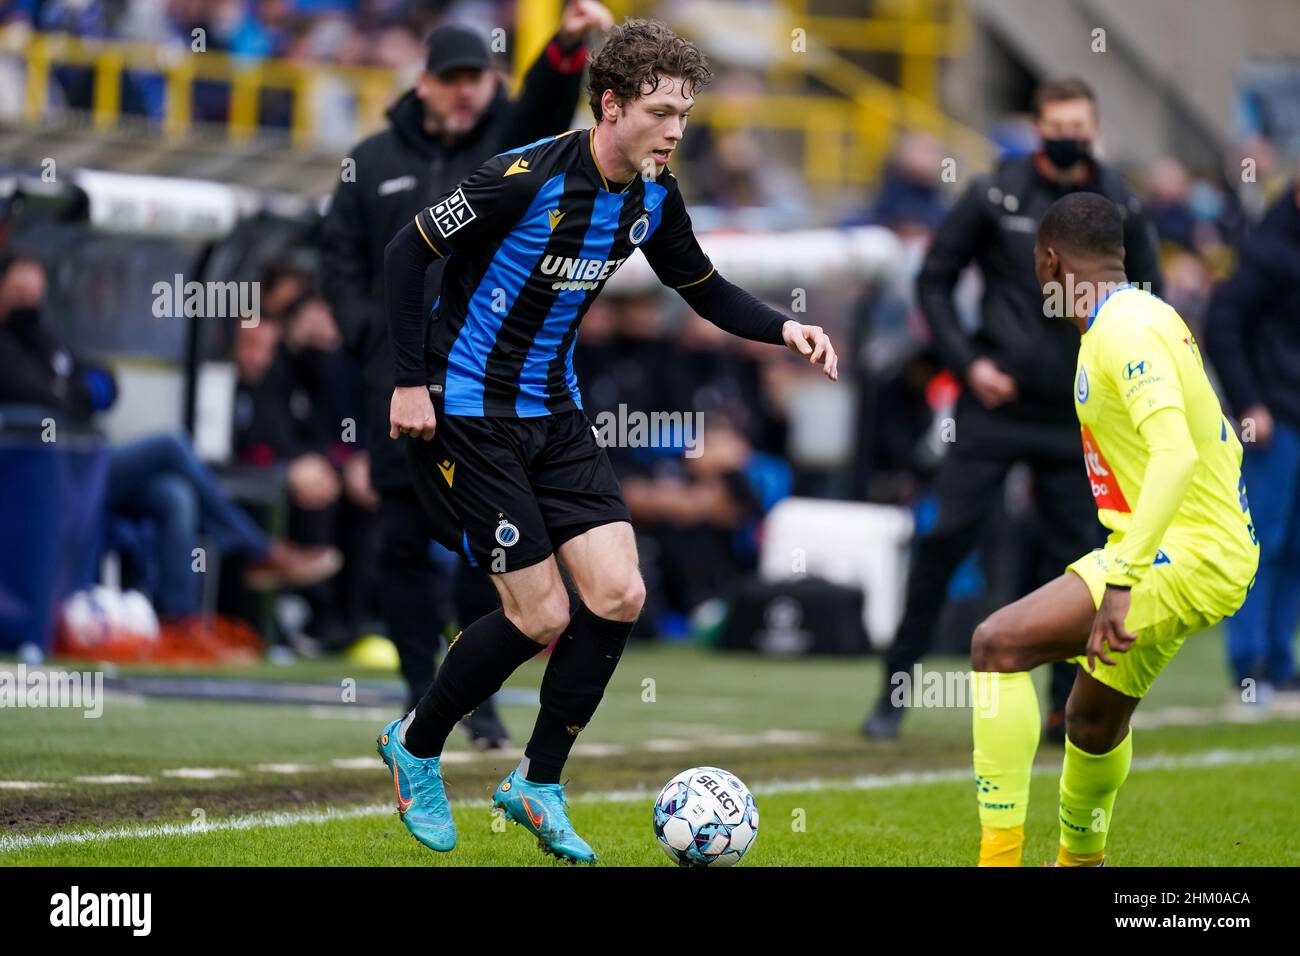 BRUGES, BELGIUM - FEBRUARY 6: Andreas Skov Olsen of Club Brugge during the  Jupiler Pro League match between Club Brugge and KAA Gent at the Jan  Breydelstadion on February 6, 2022 in